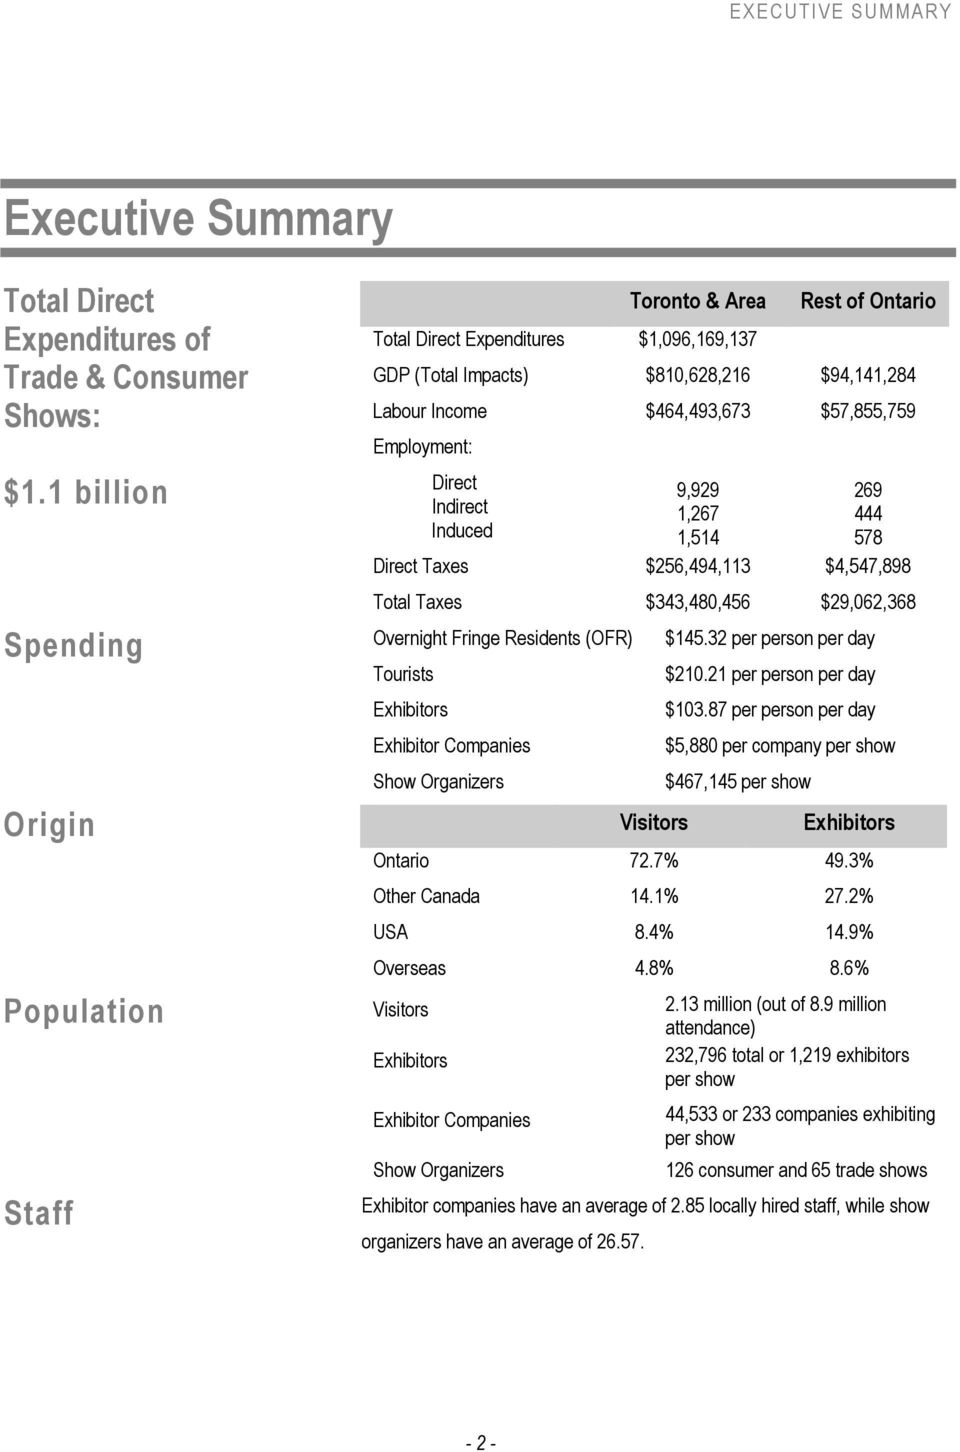 Indirect 1,267 444 Induced 1,514 578 Direct Taxes $256,494,113 $4,547,898 Total Taxes $343,480,456 $29,062,368 Spending Overnight Fringe Residents (OFR) $145.32 per person per day Tourists $210.